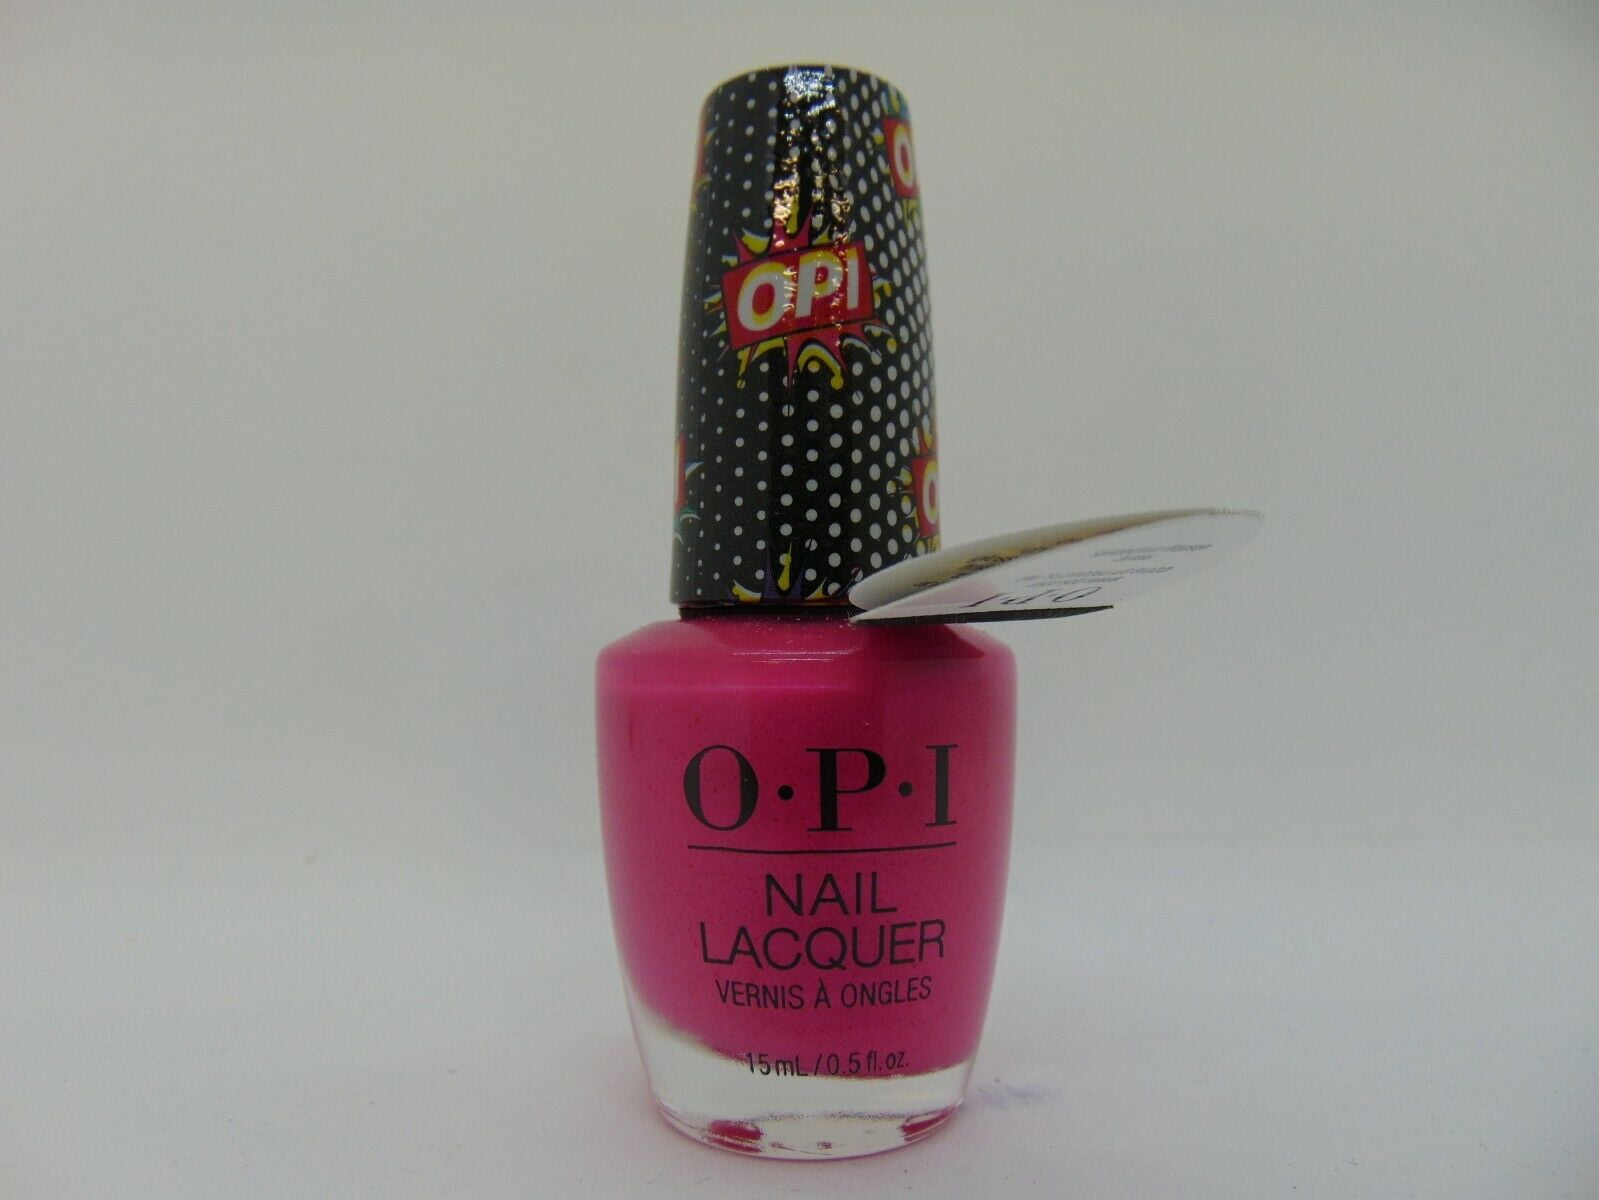 OPI Nail Lacquer, Mod About You - wide 10